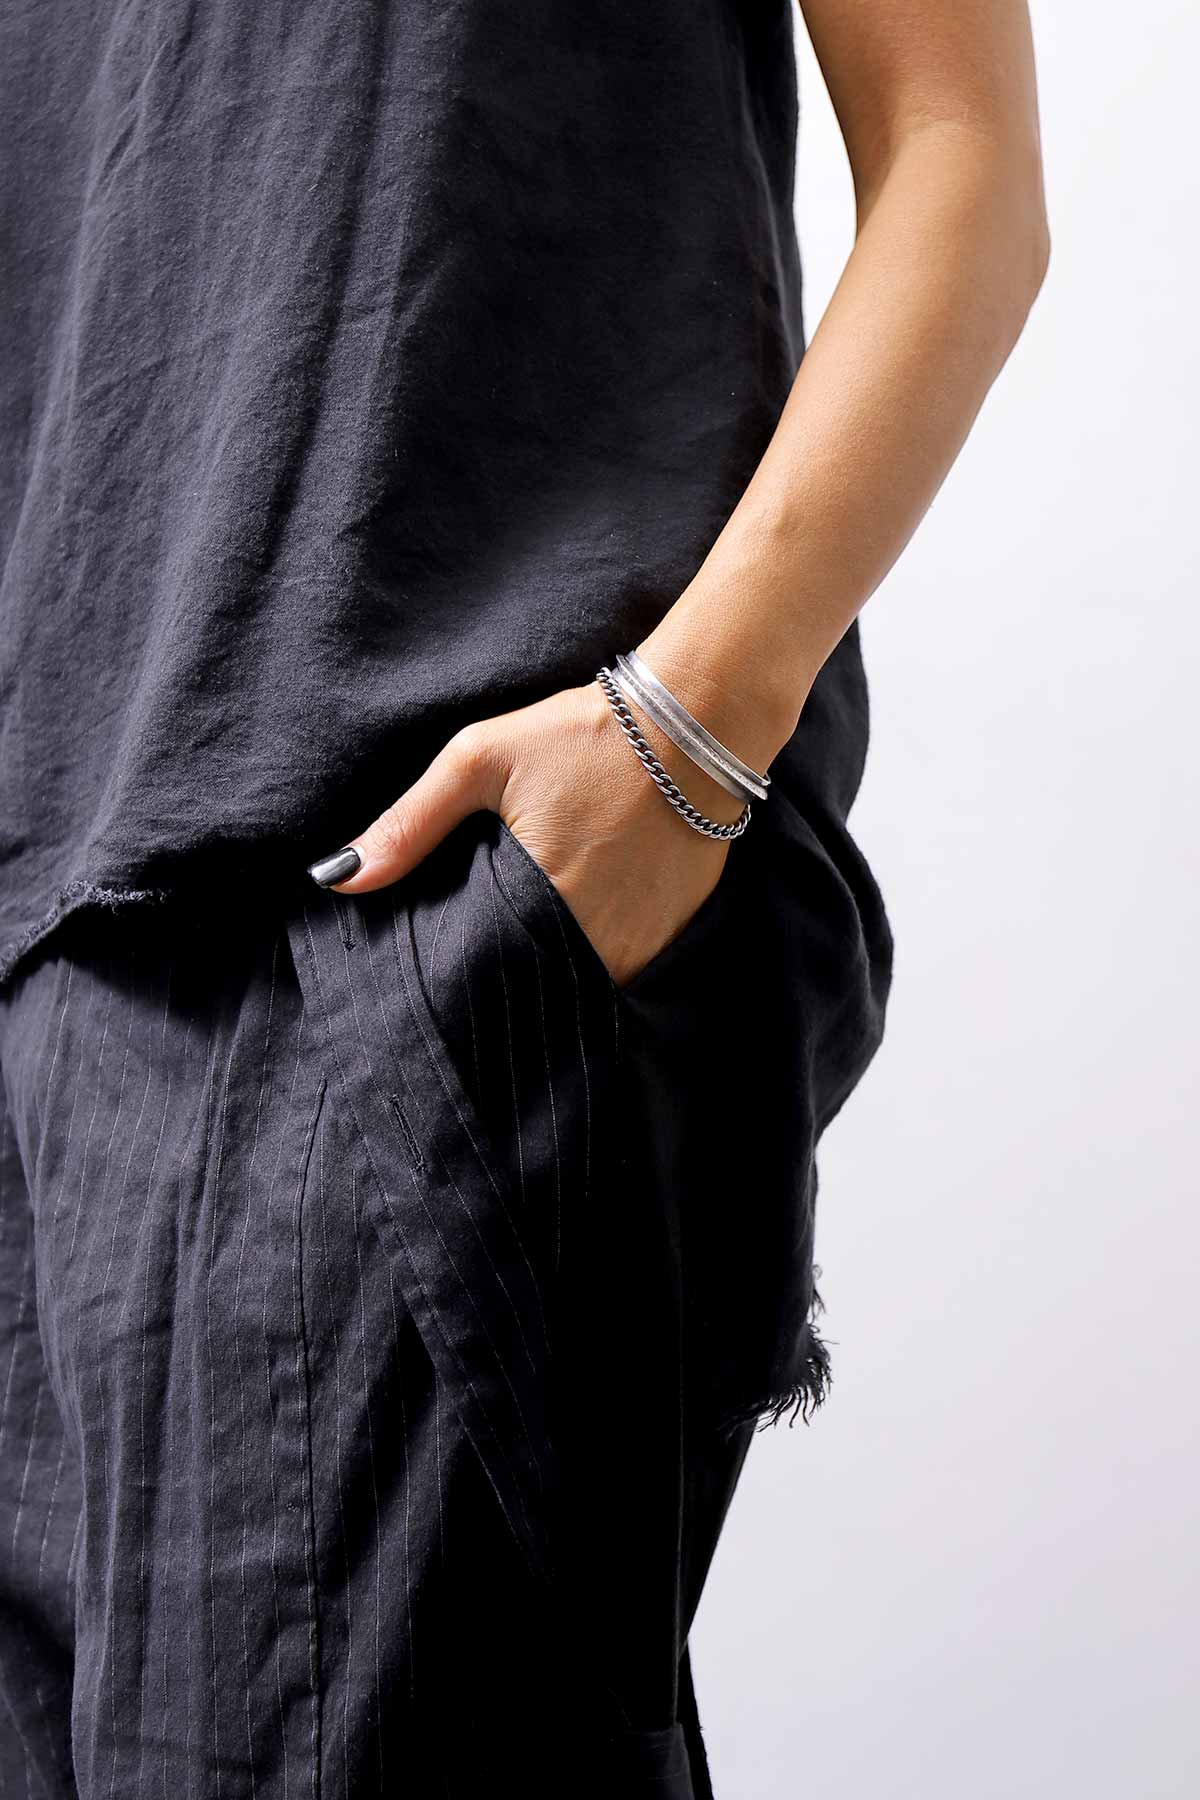 Rusty Thought【ラスティーソート】ENGLAVED SILVER BANGLE & CUFF